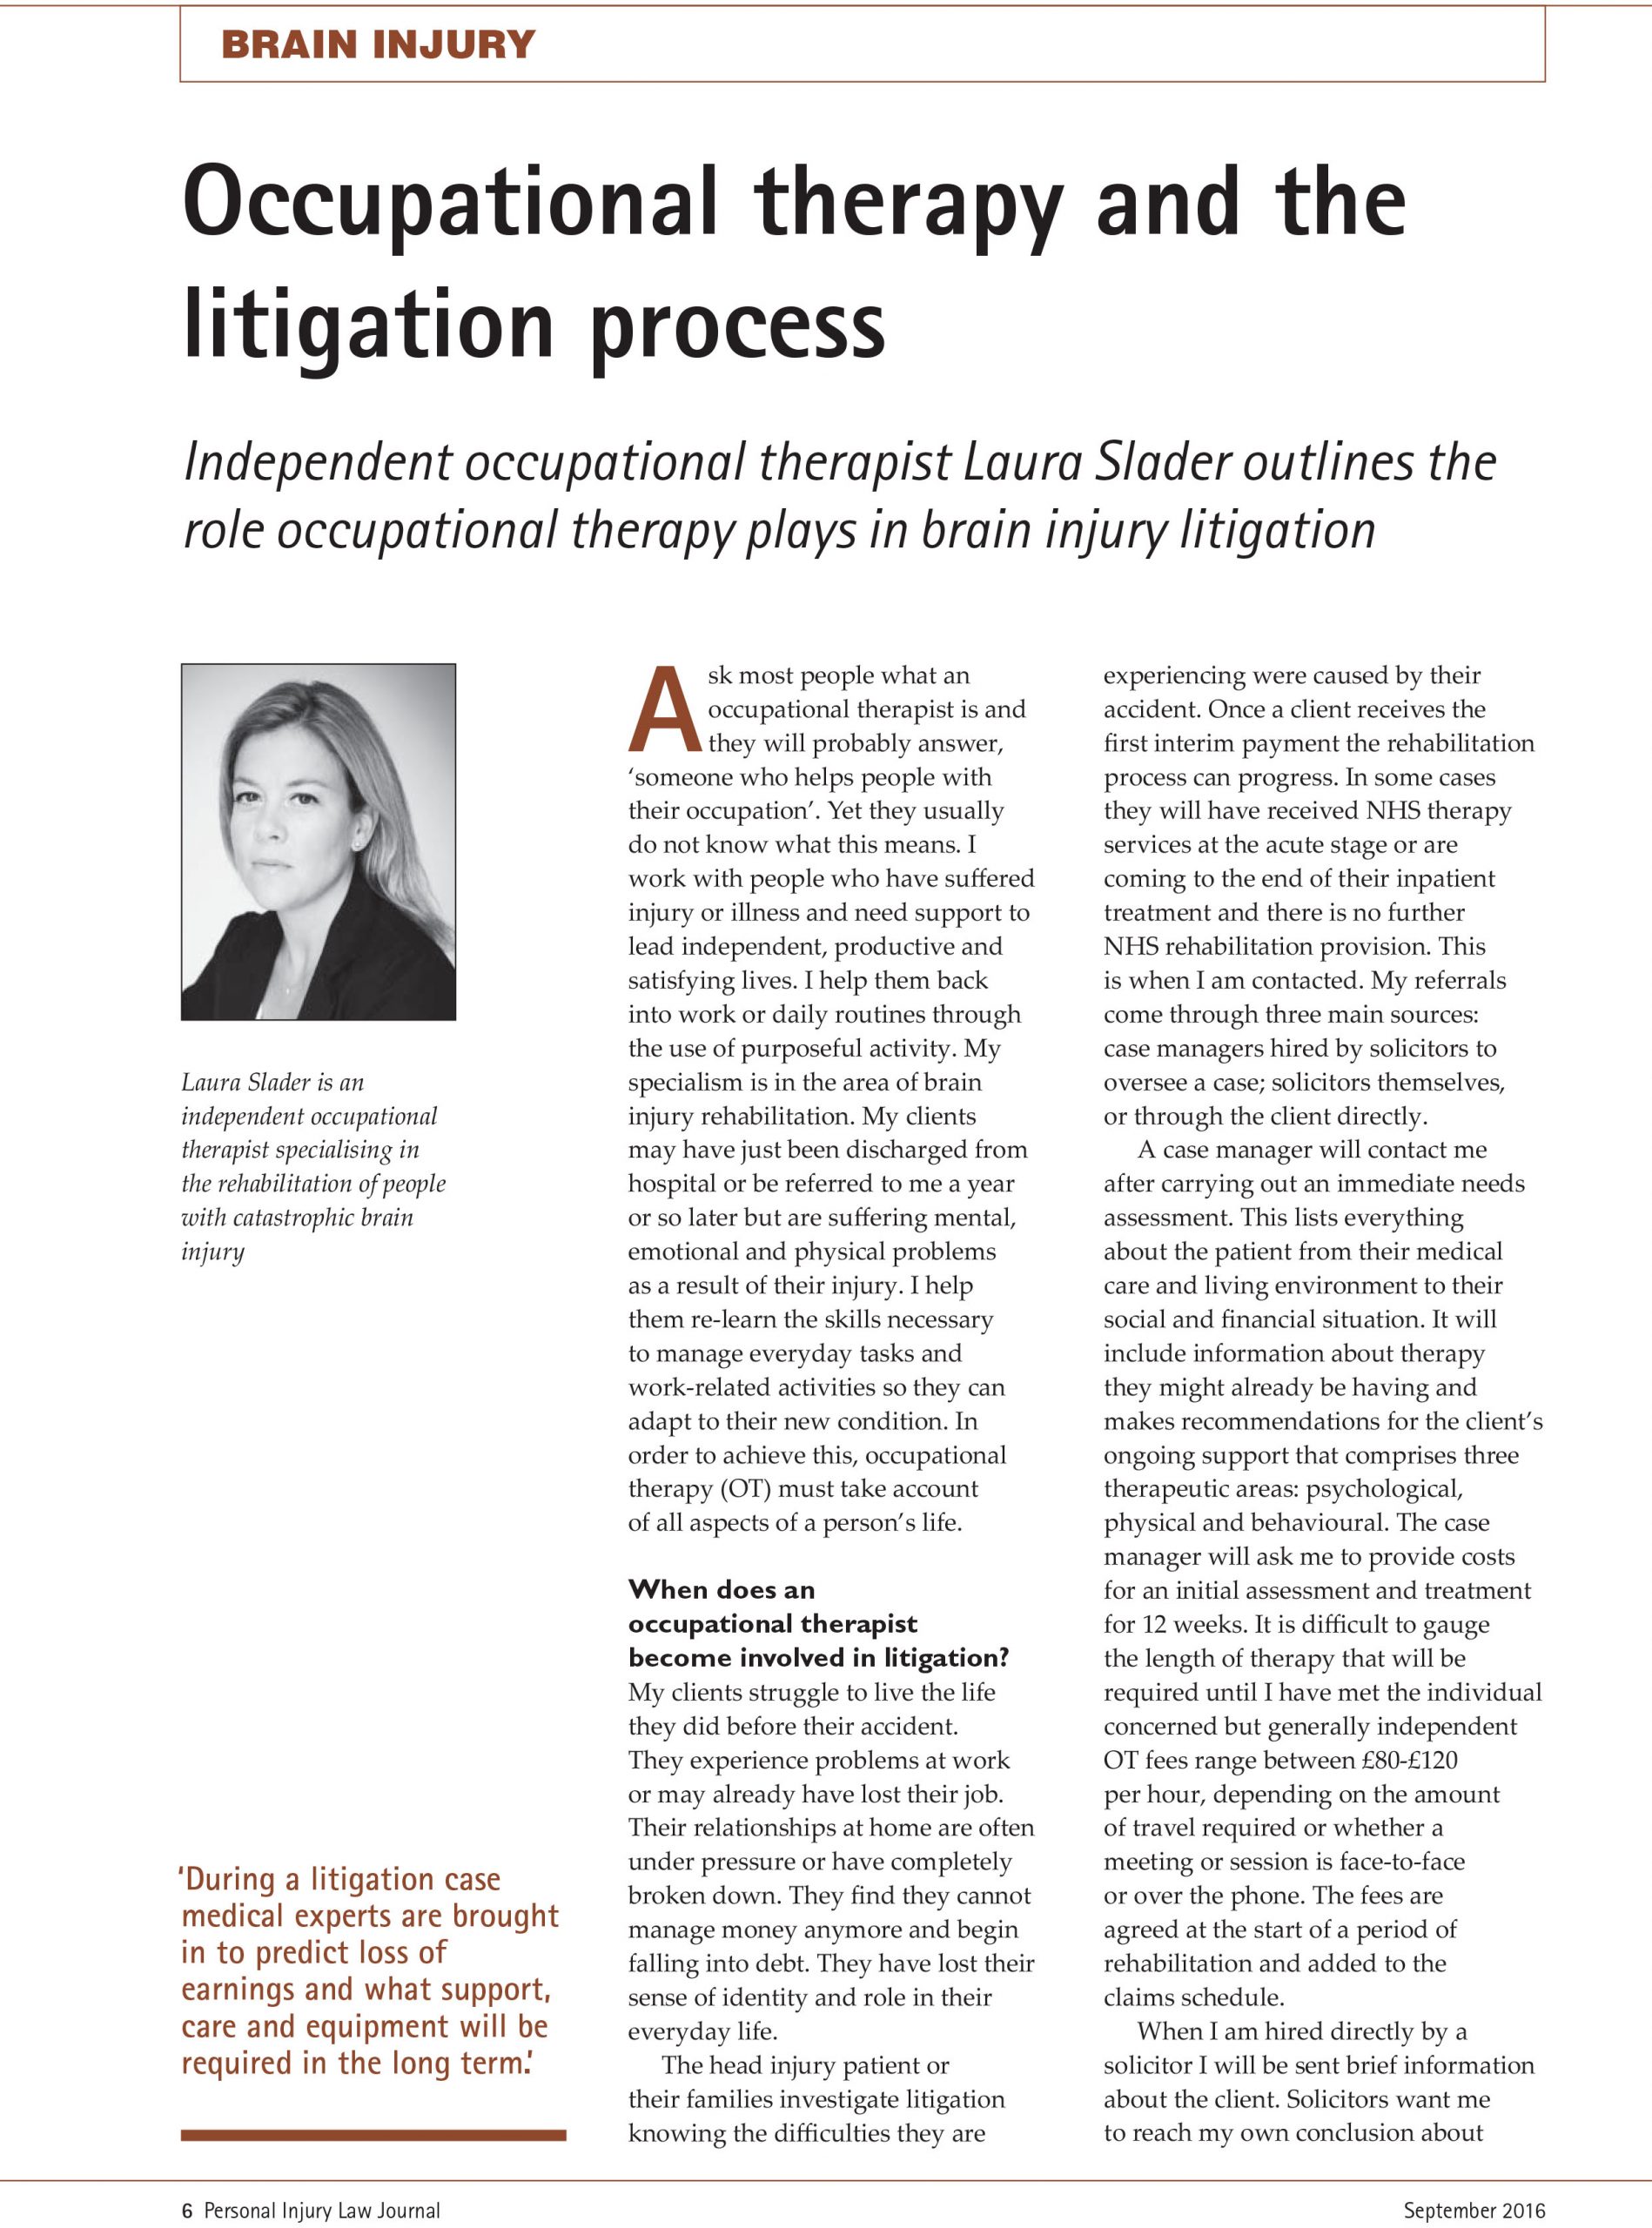 Article on neuro occupational therapy and brain injury litigation